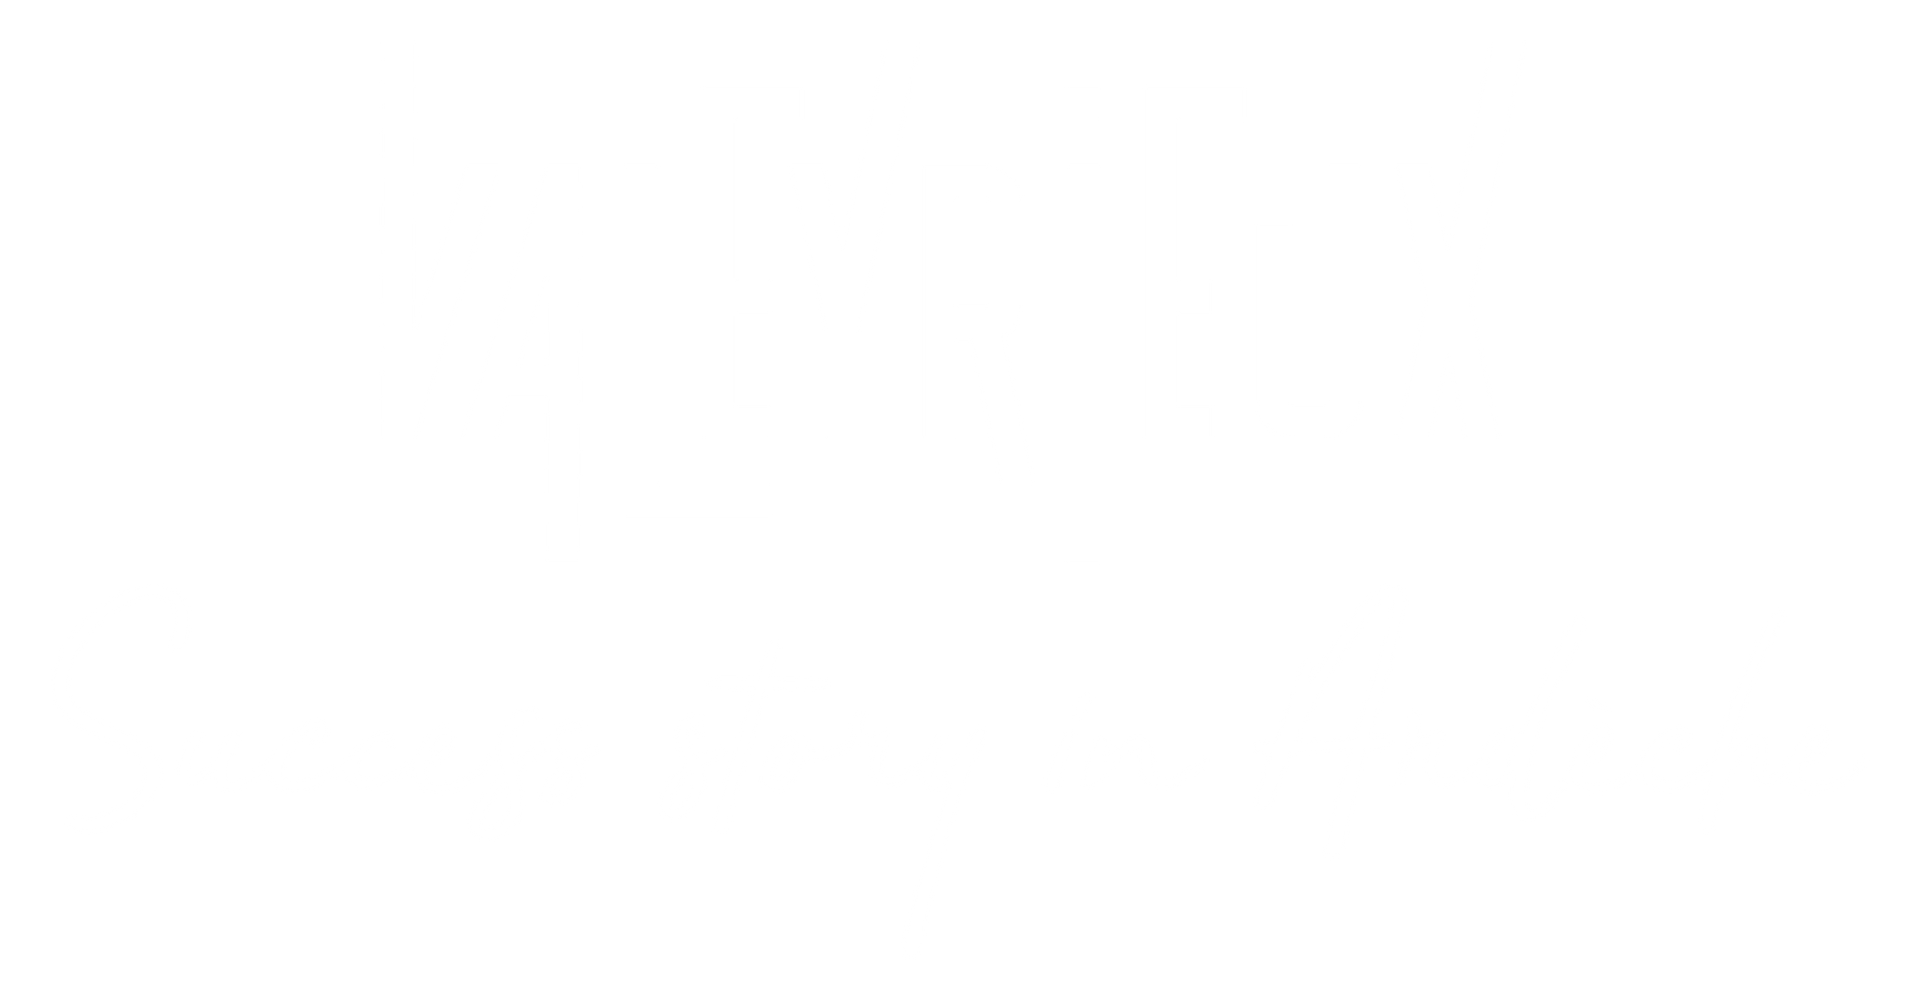 VALEYRIEUX, Success story in Ardèche